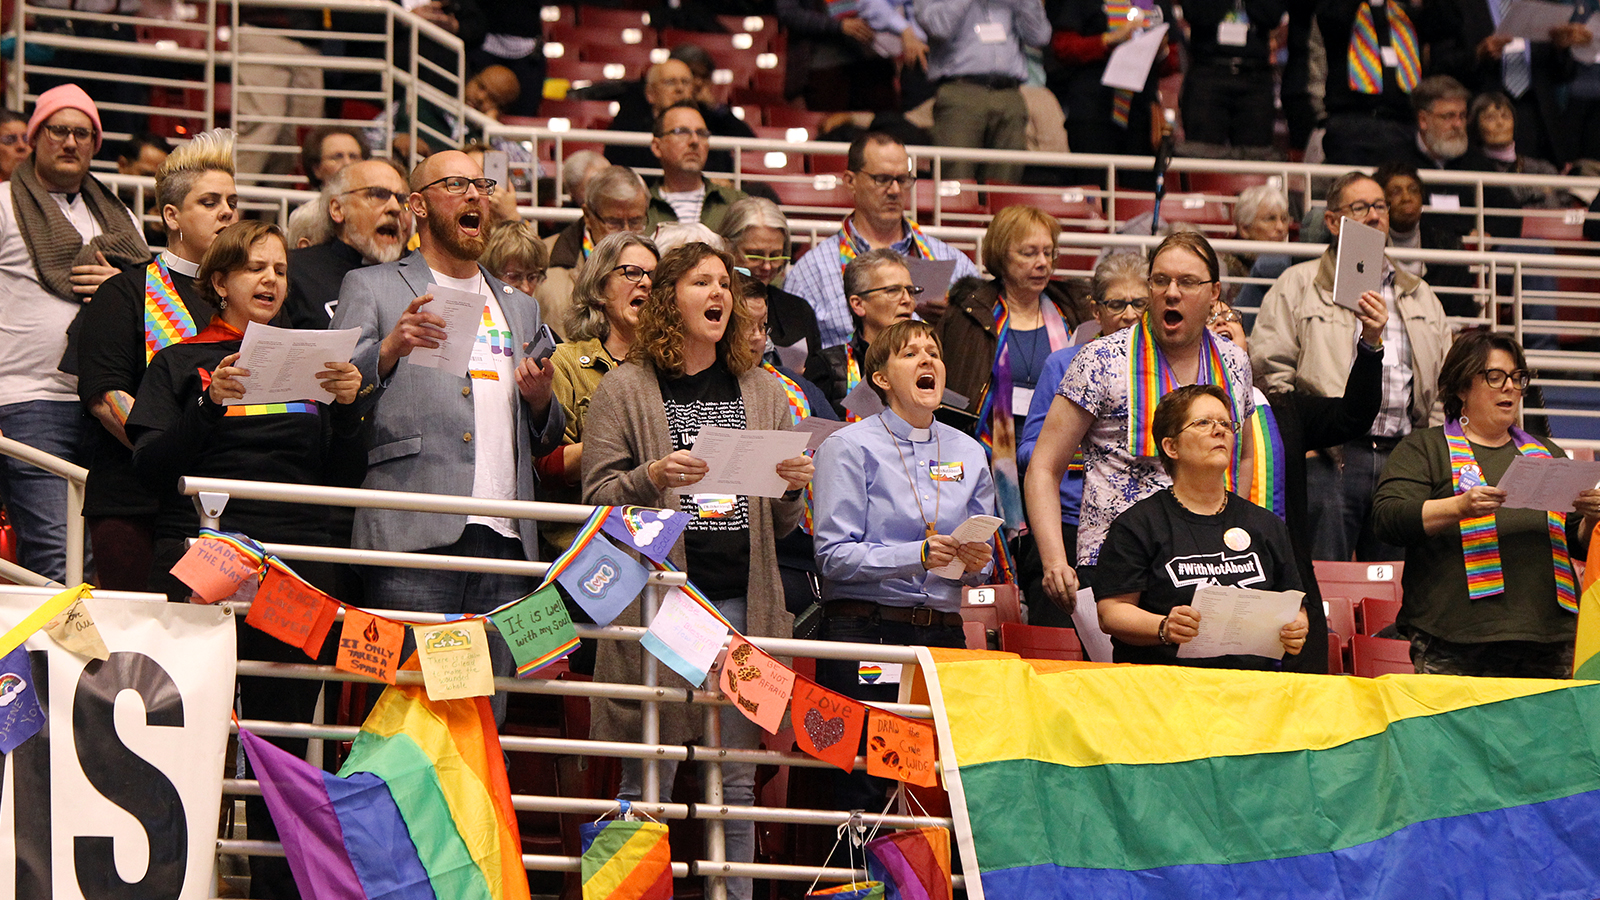 LGBTQ advocates react to the Traditional Plan being adopted at the UMC General Conference on Feb. 26, 2019, in St. Louis. RNS photo by Kit Doyle